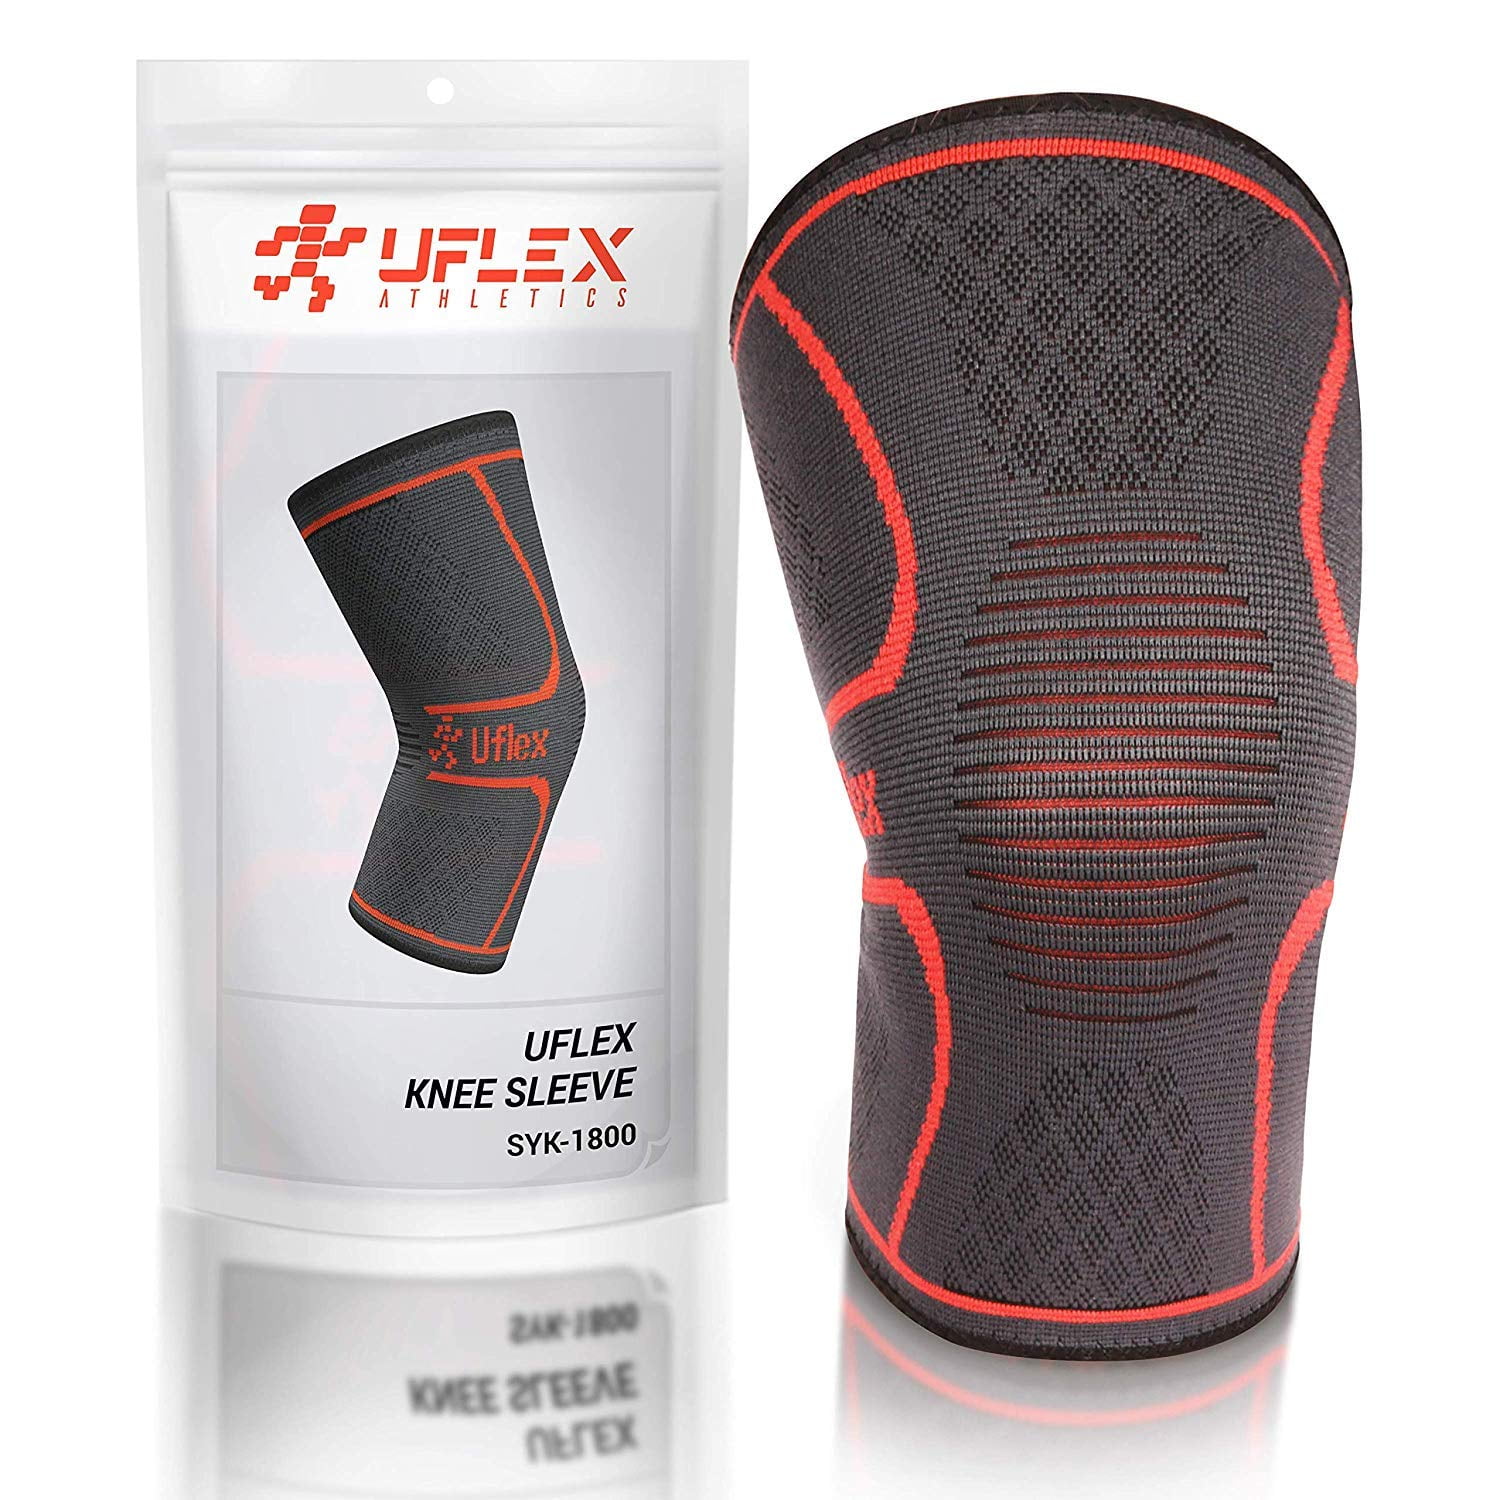 Knee Brace Compression Sleeves Support Sports Joint Injury Pain Relief Arthritis